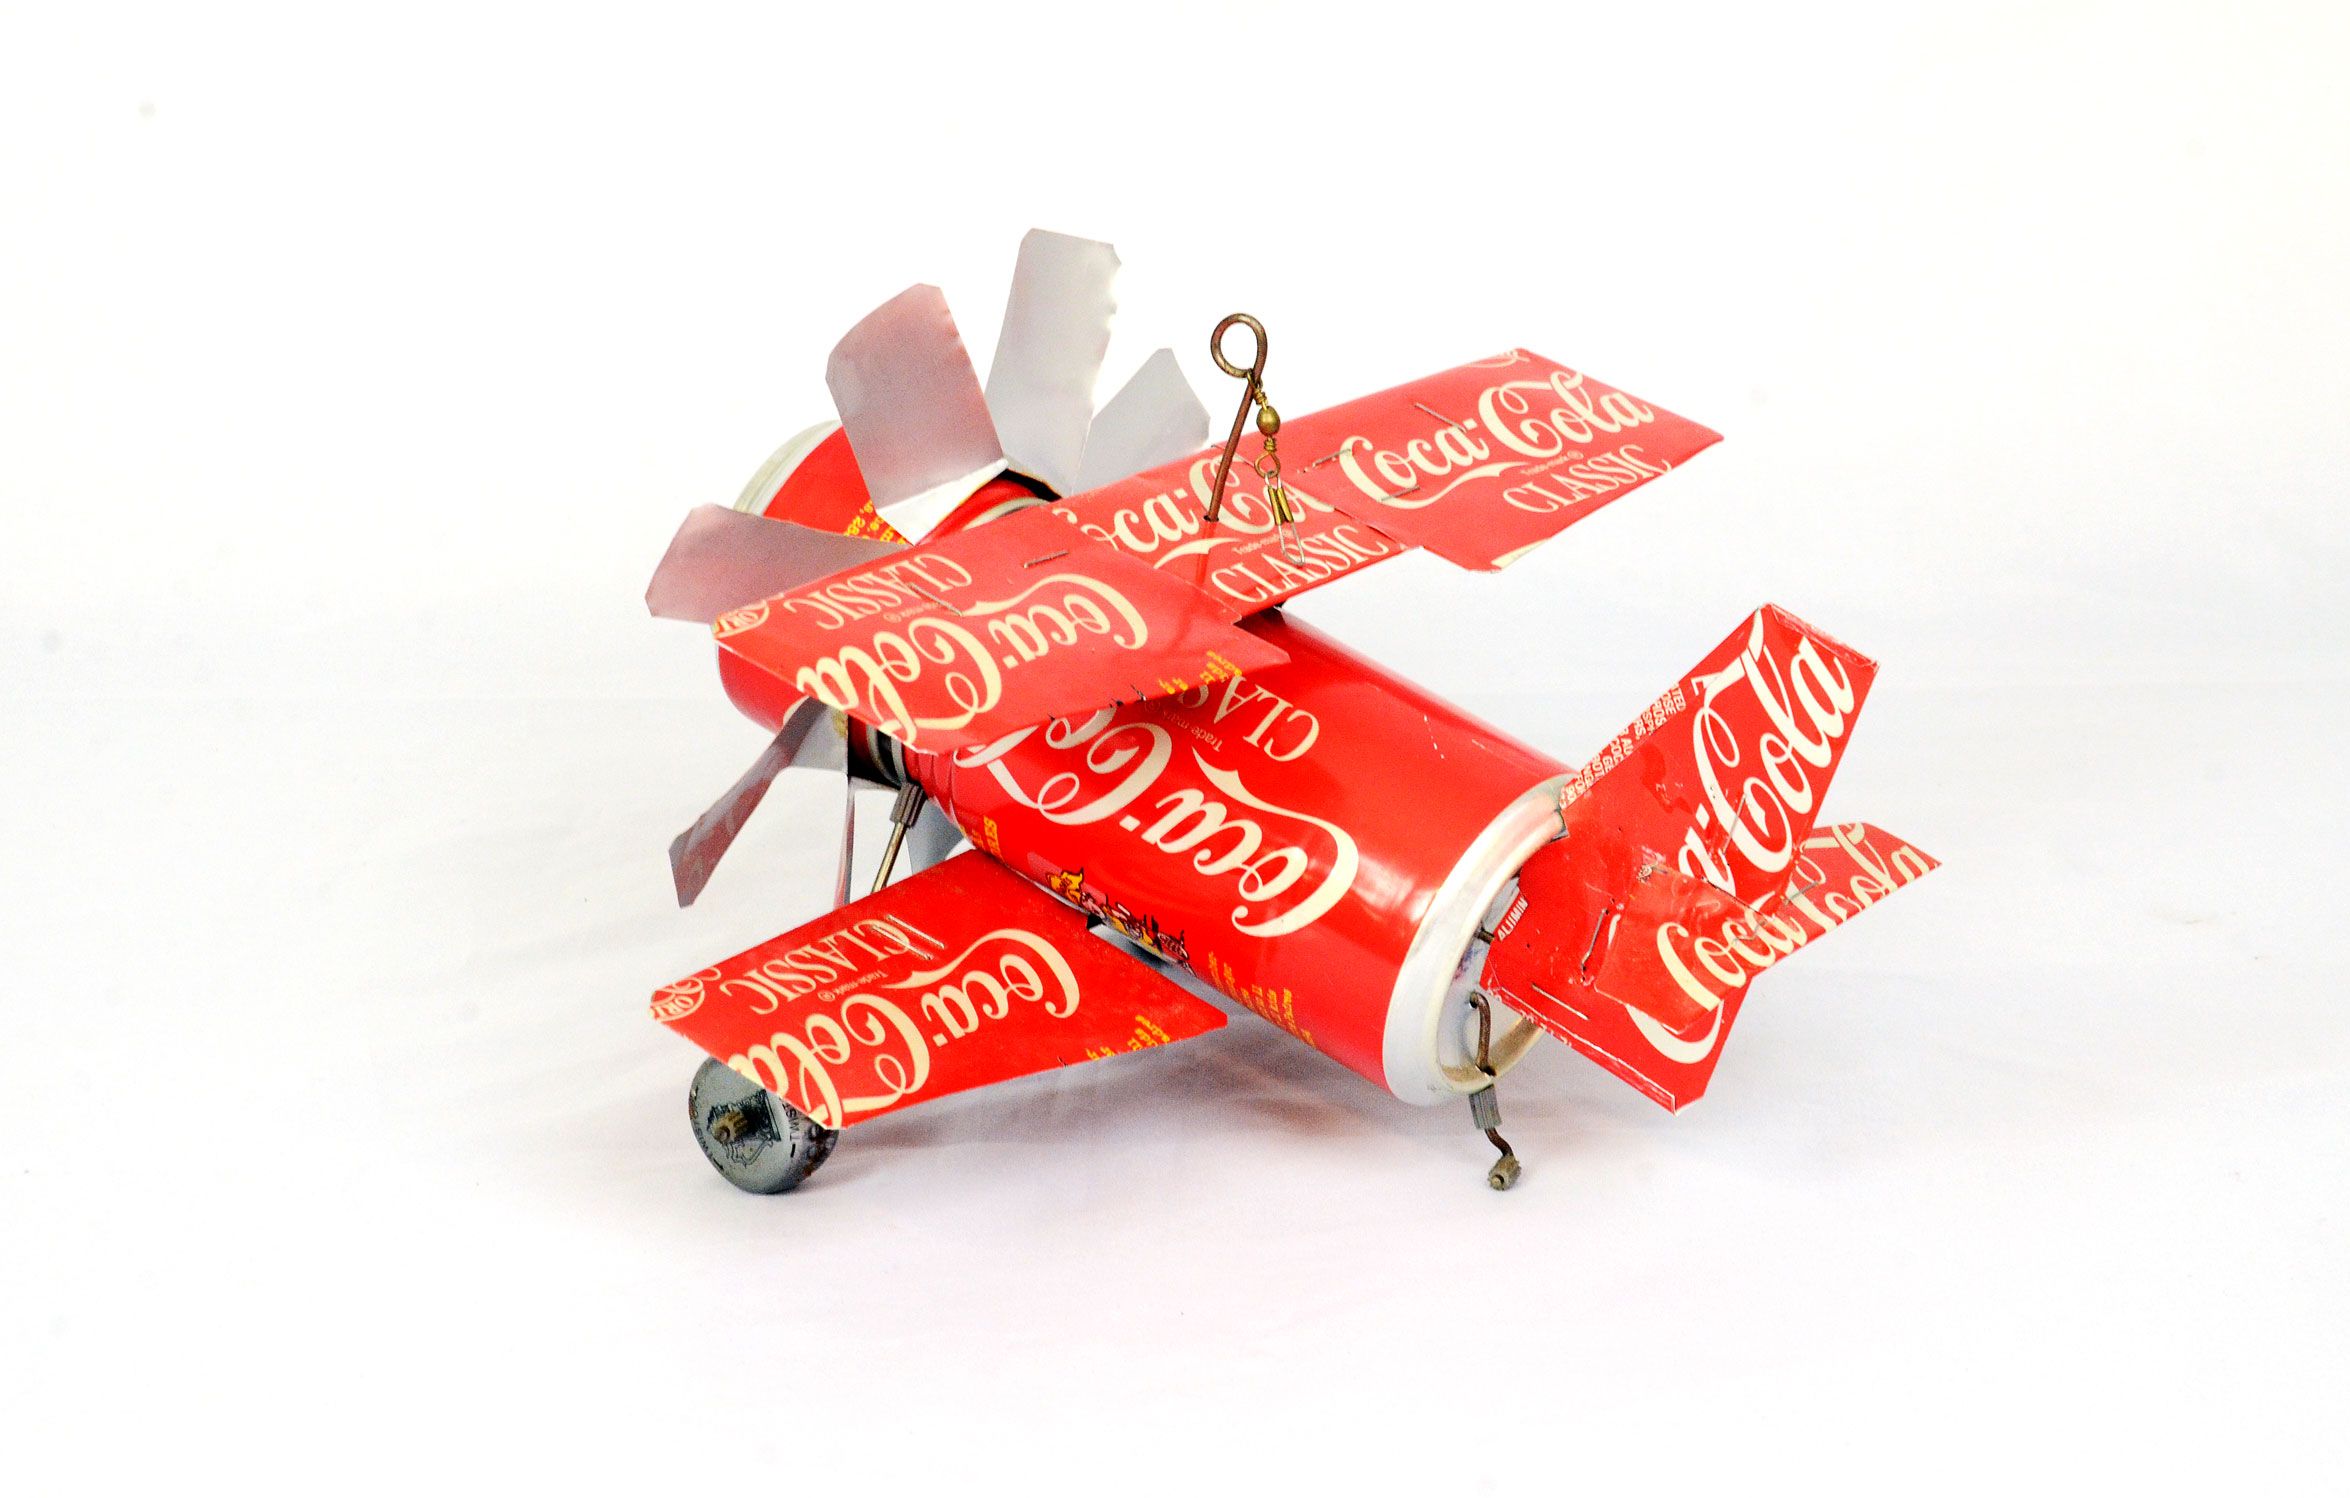 Hangable biplane toy made from Coca-Cola cans